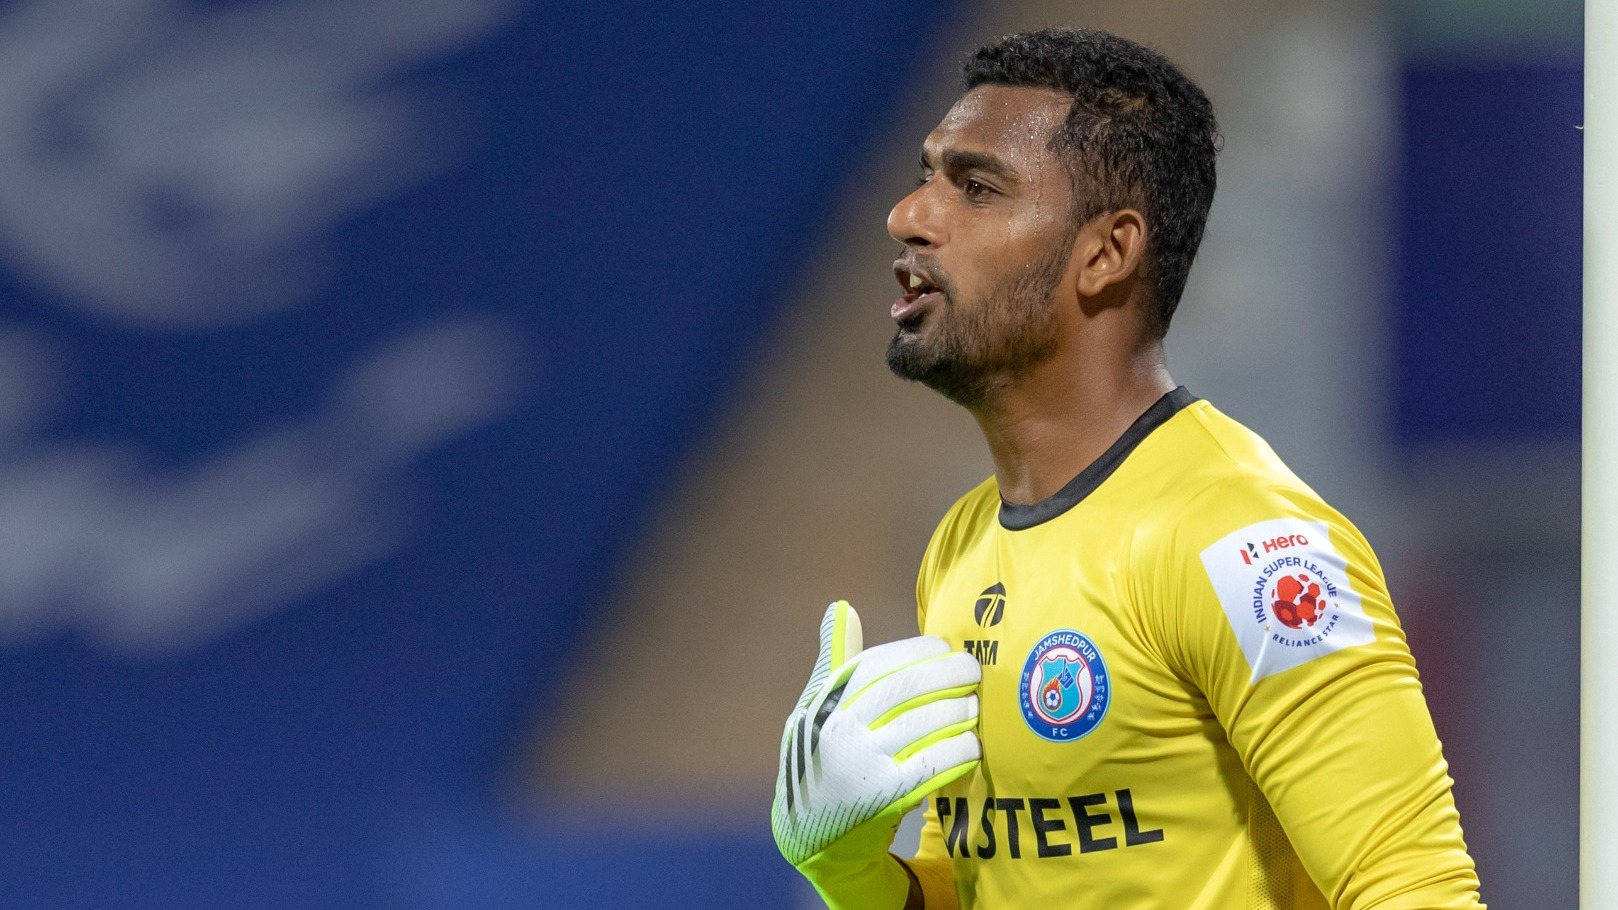 I'M Very Happy To Be Part Of The Jamshedpur Family” - Rehenesh After The  Win Over Fc Goa - Jamshedpur Football Club